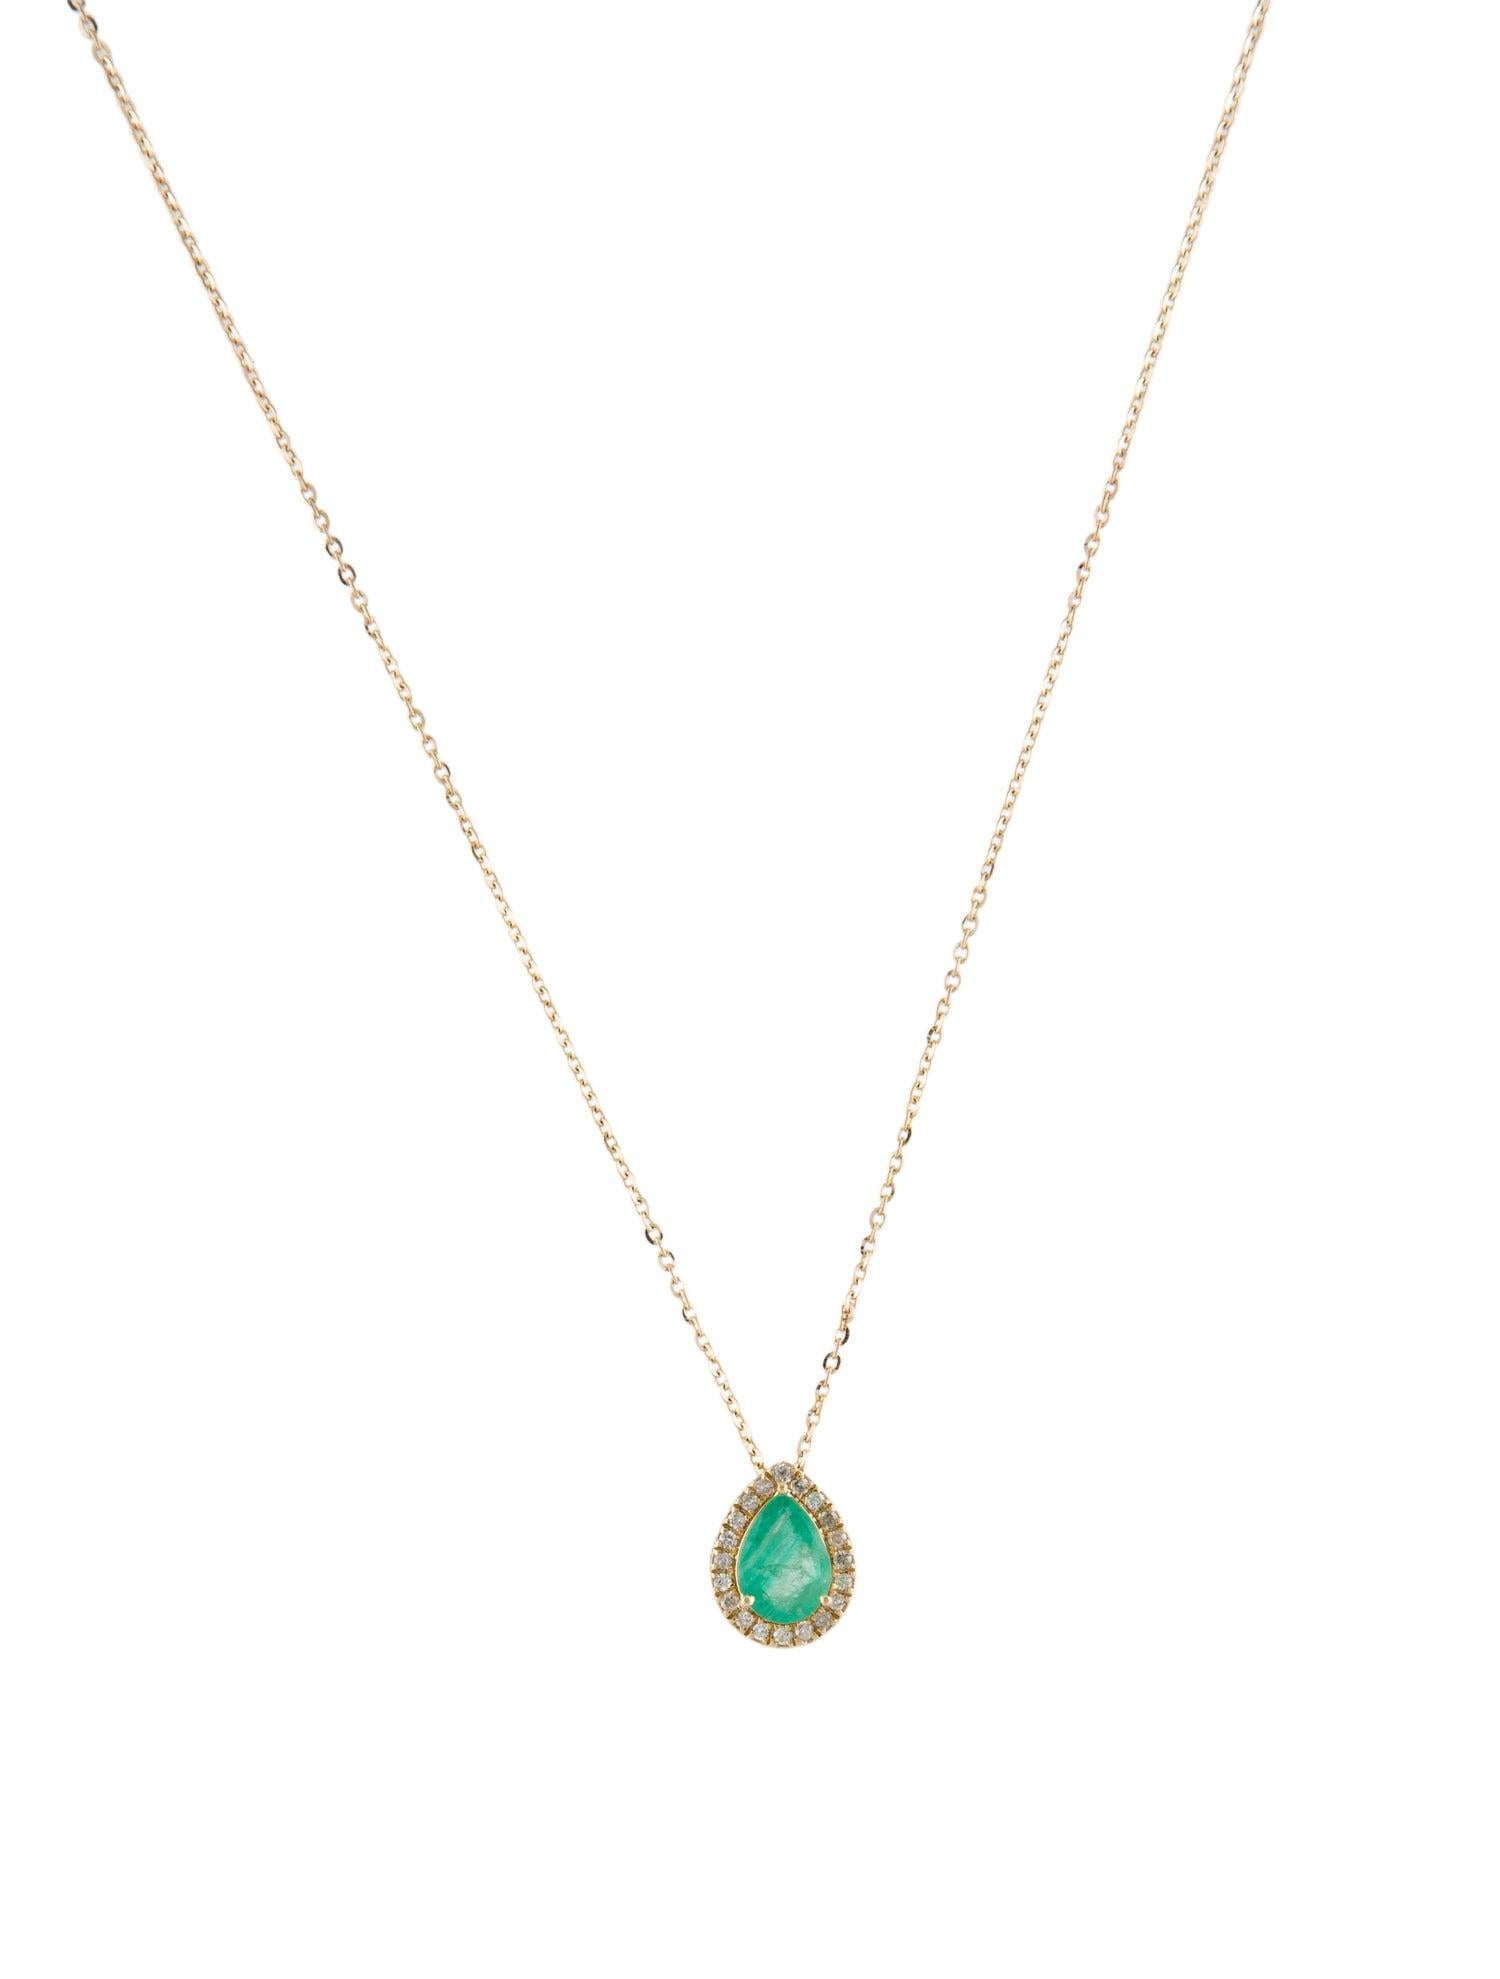 Immerse yourself in the captivating allure of nature with our Forest Ferns collection. This exquisite pendant, adorned with a radiant pear-shaped emerald and delicate round diamonds, transports you to the heart of lush, verdant forests. Crafted with